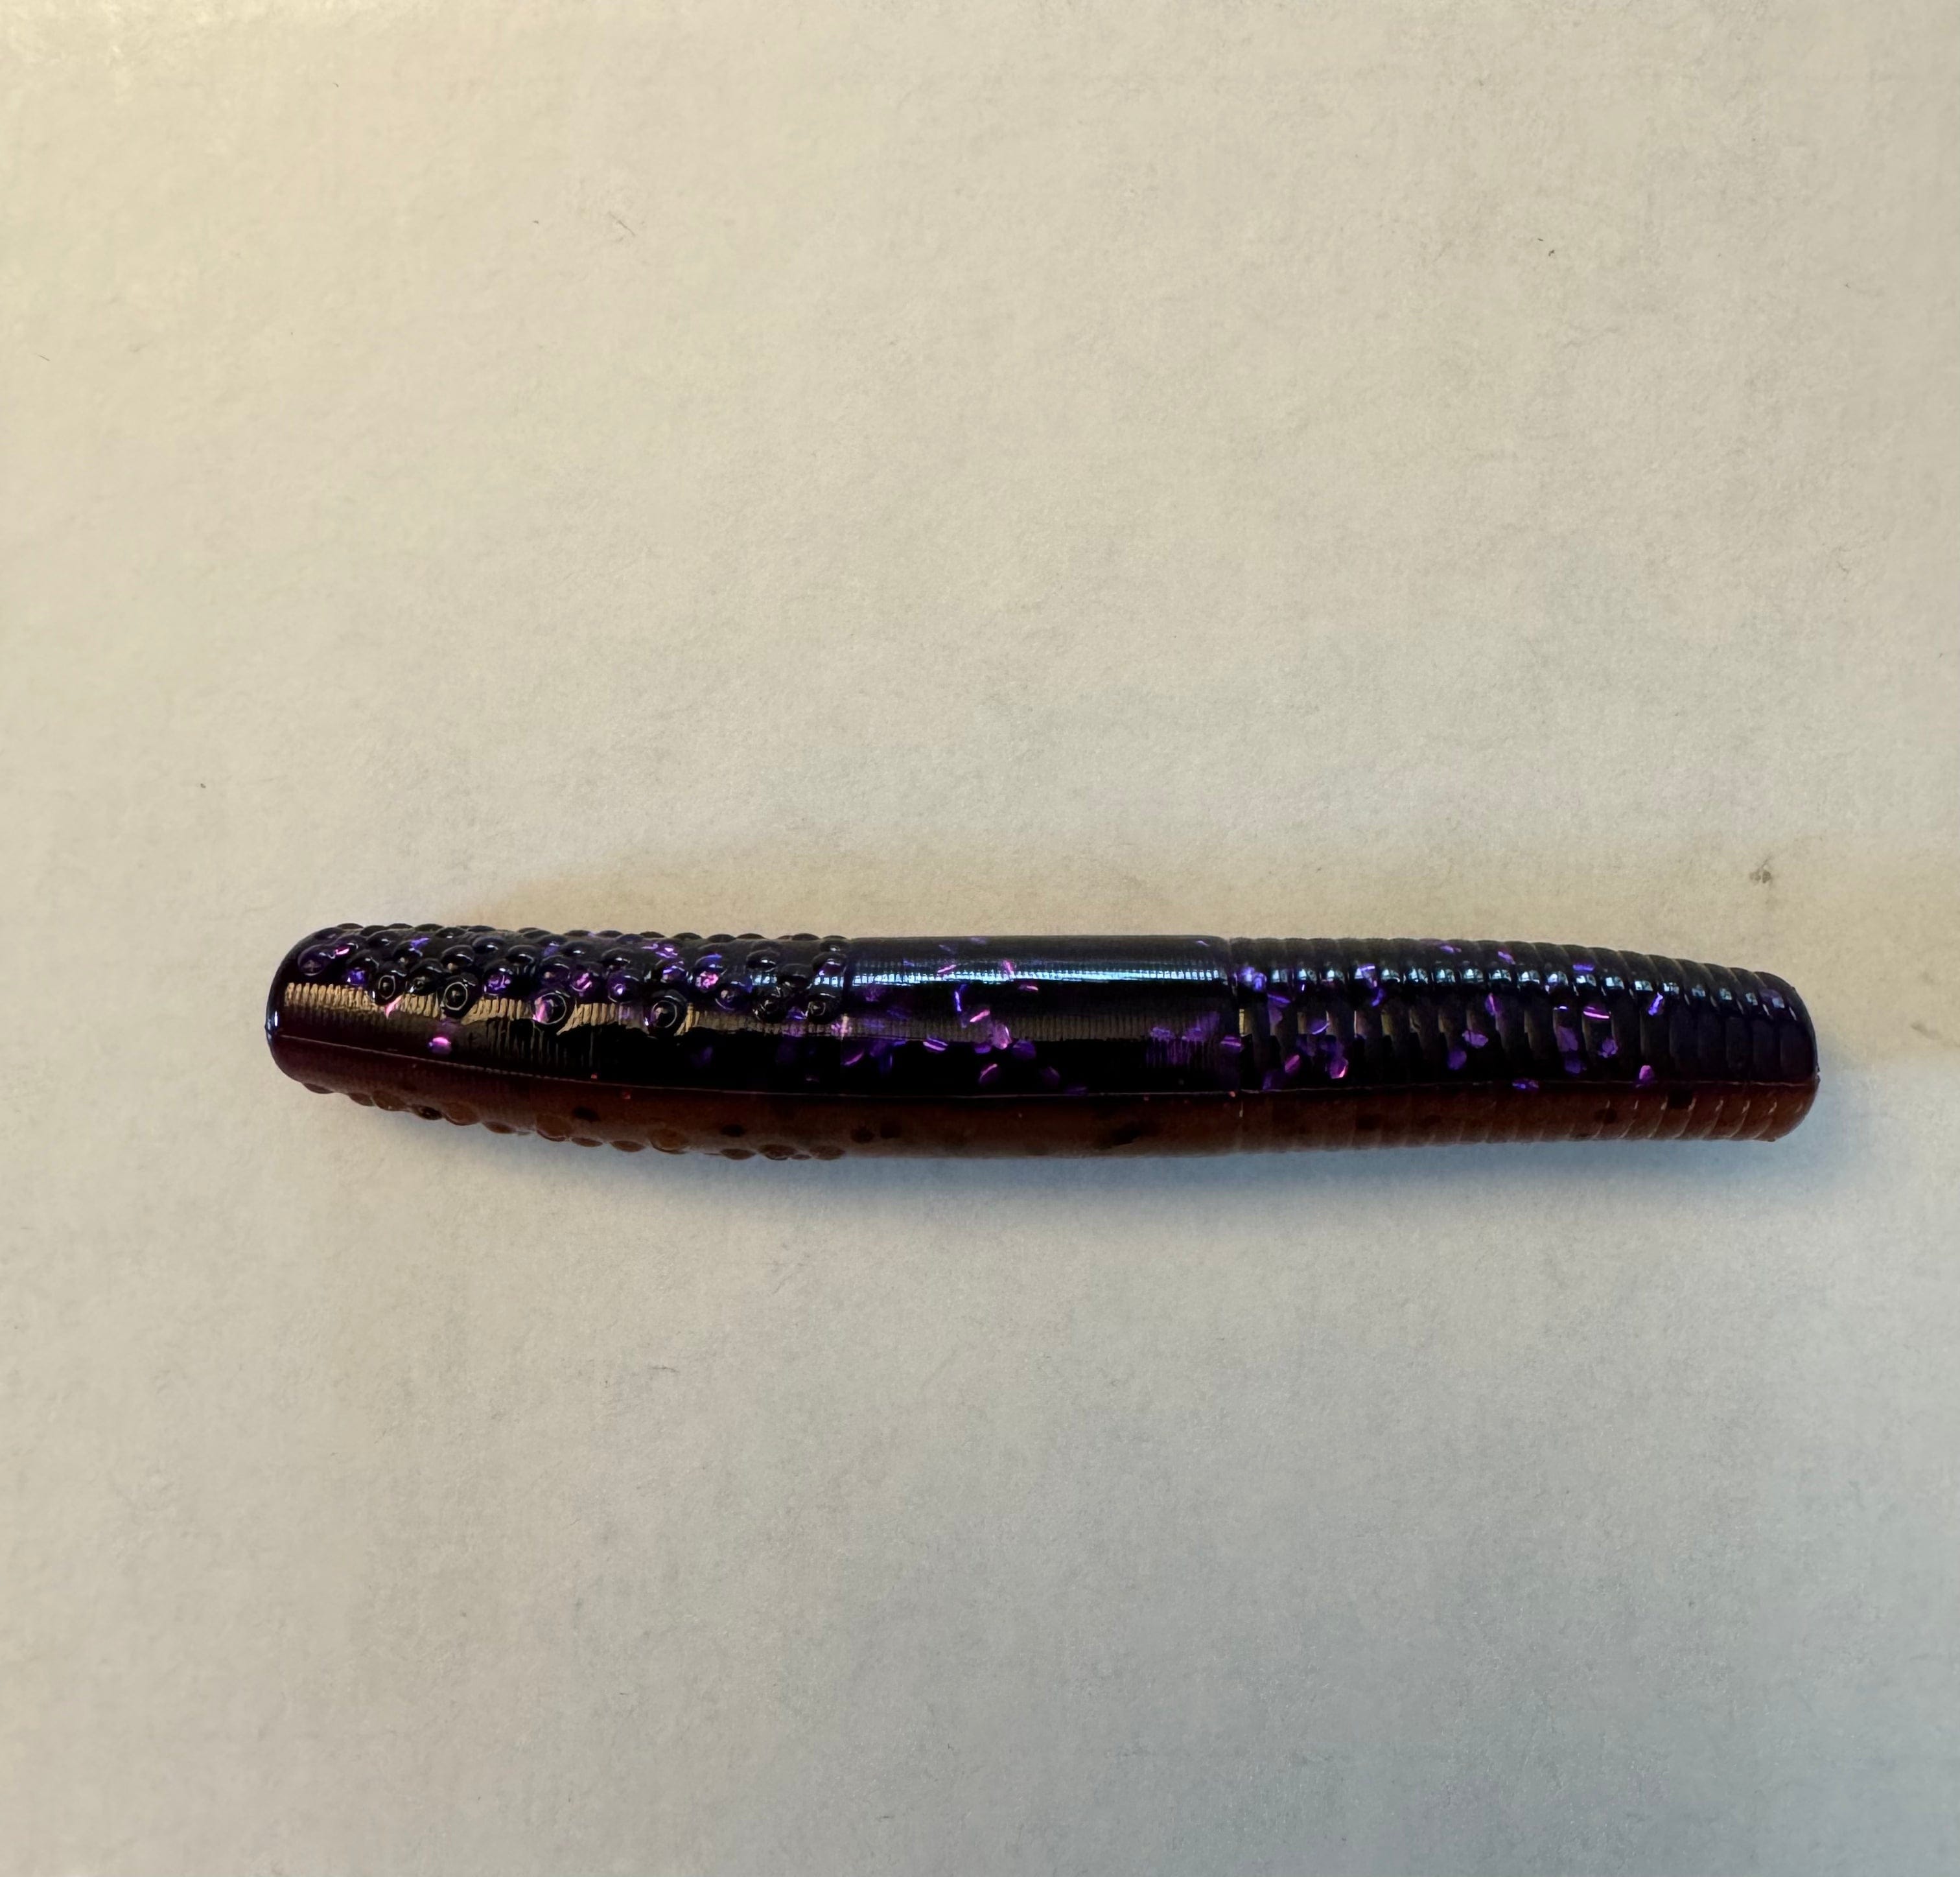 Vicious Fishing Baits 2.75" Ned Candy